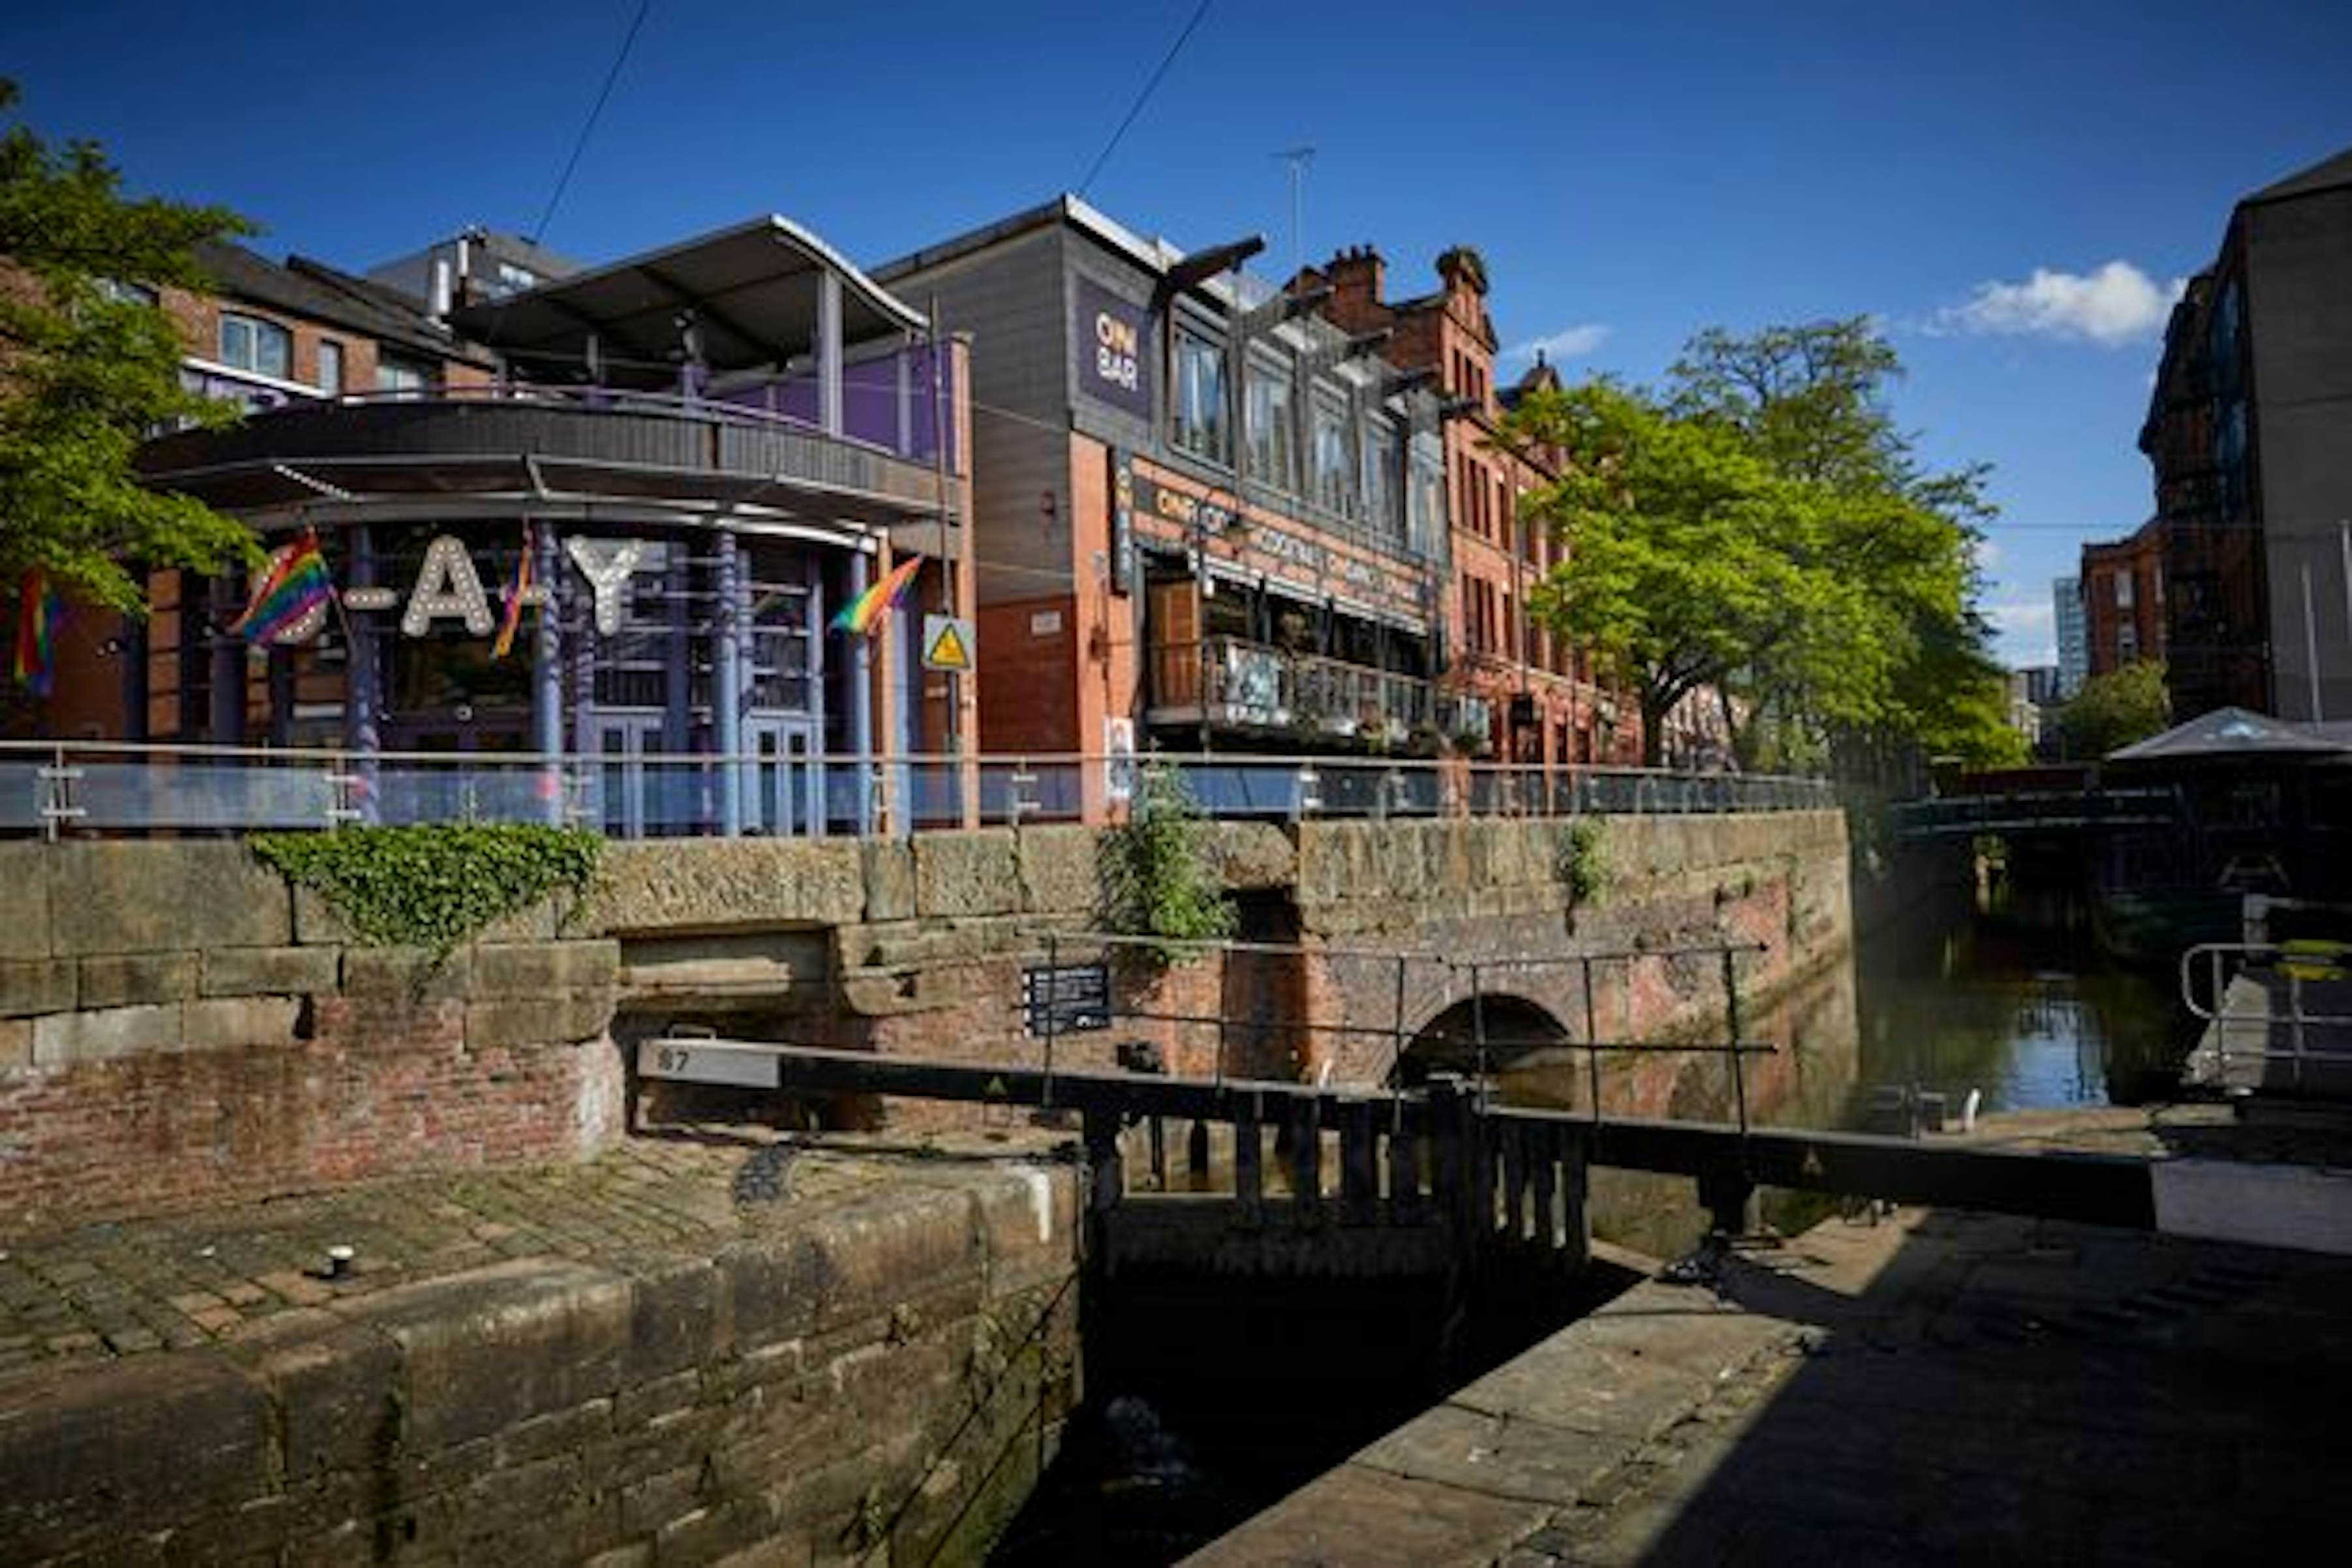 The best waterside pubs and bars in ...